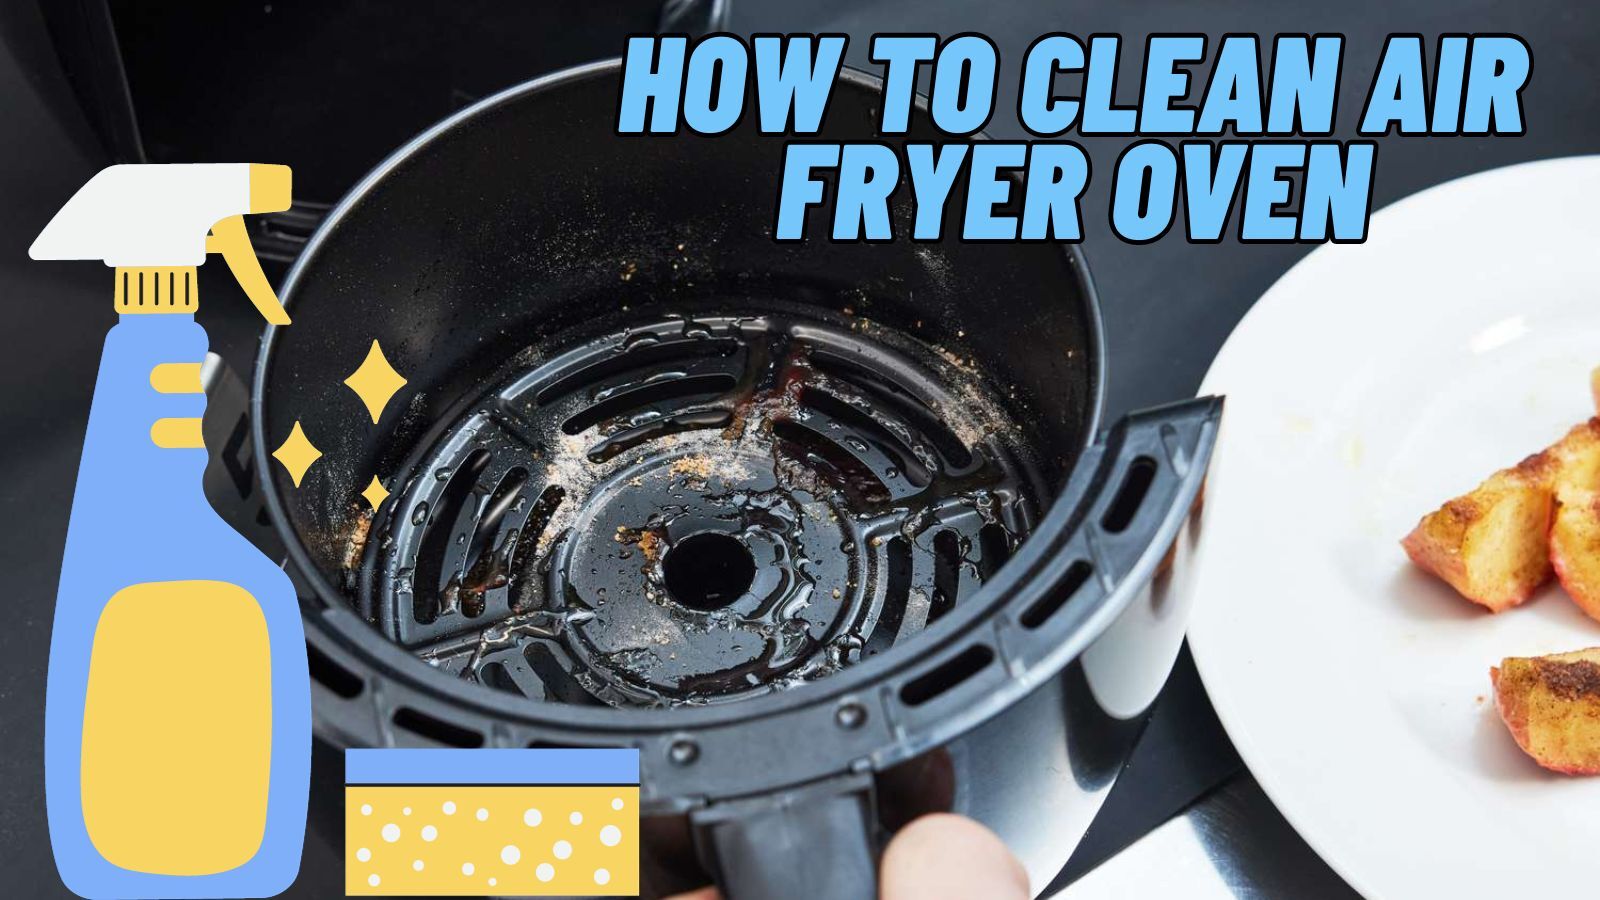 How to Clean Air Fryer Oven [Get Rid of Baked-On Food & Grease]